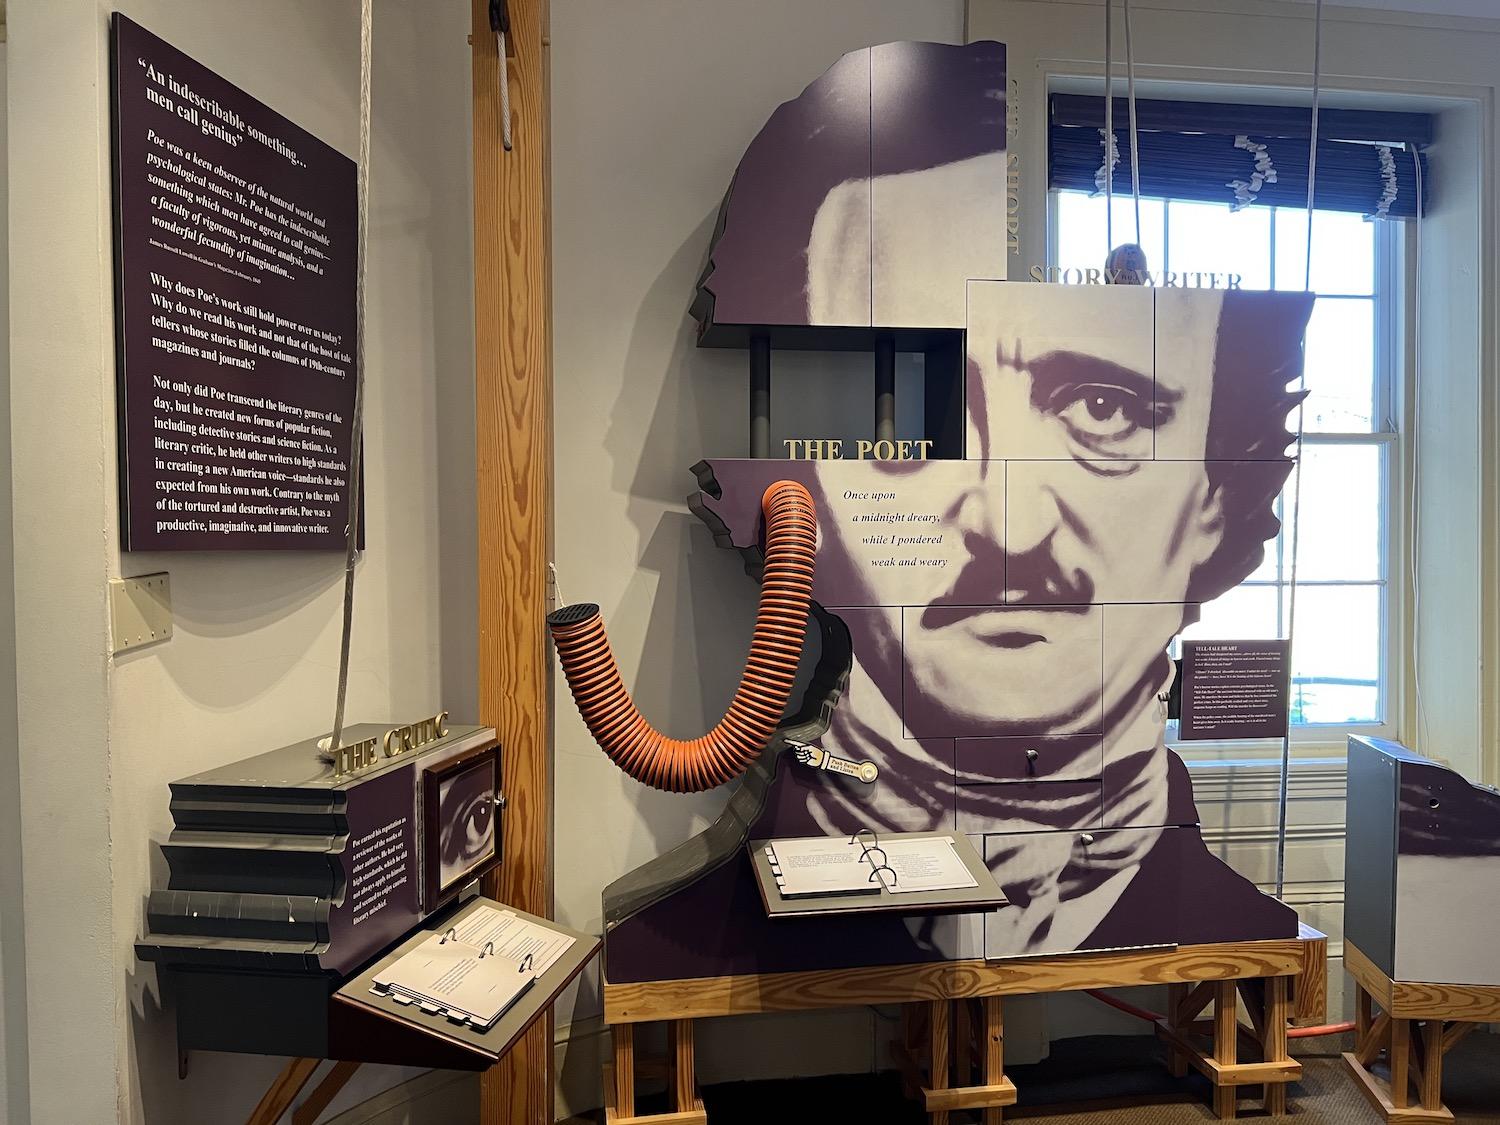 Part of the Poe House complex includes exhibits about the author's life and career.